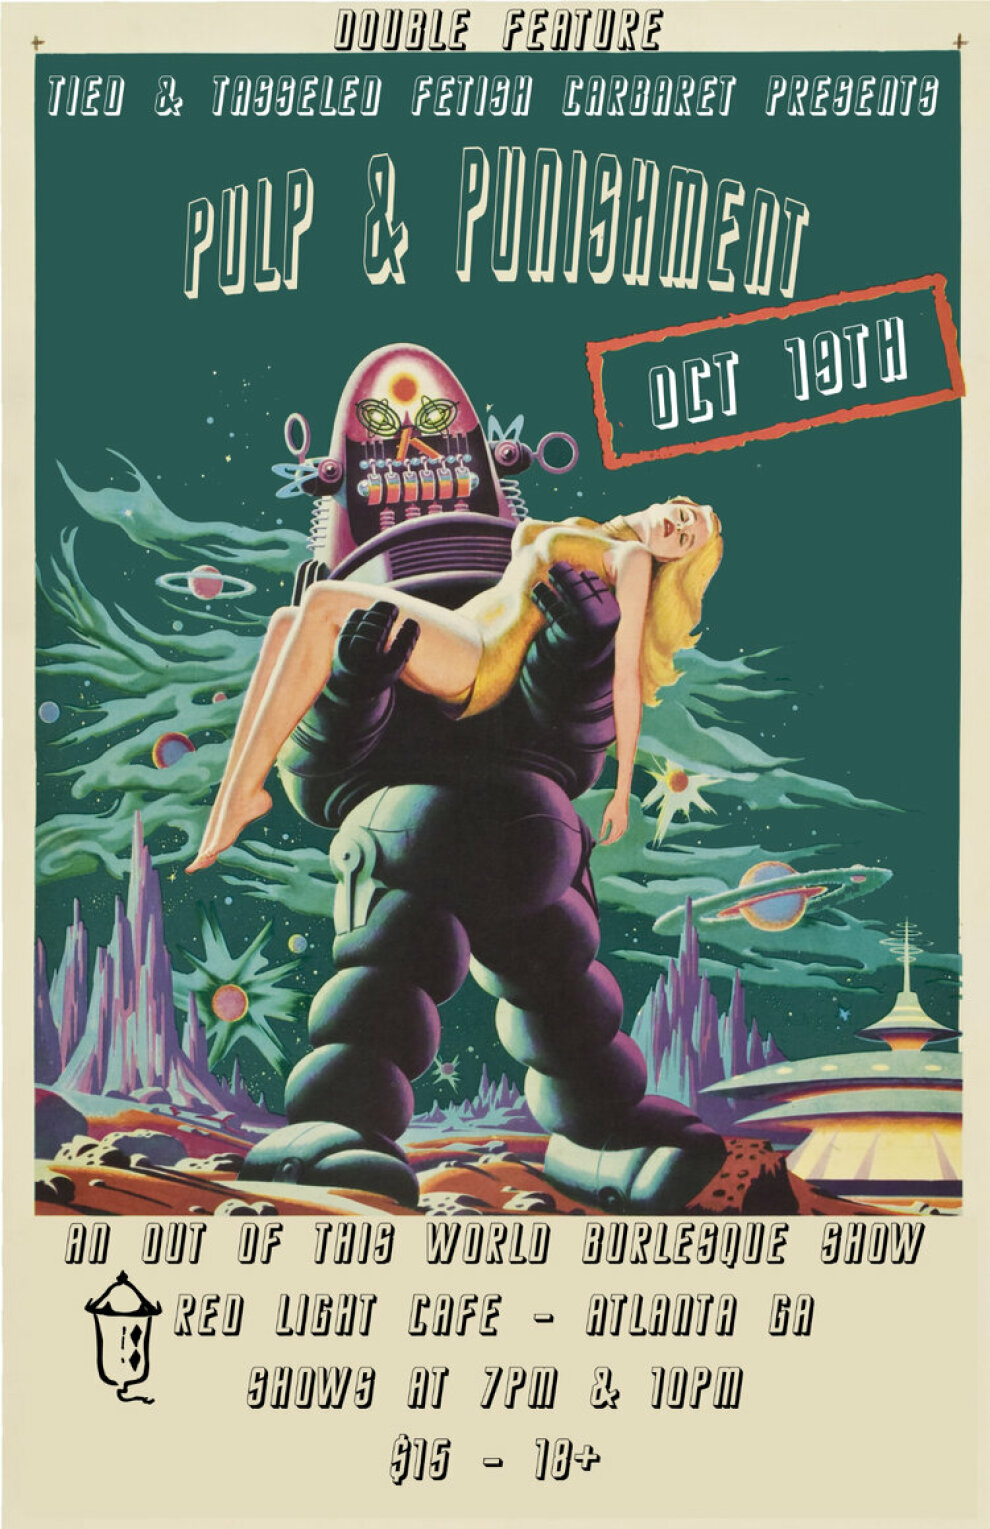 Pulp And Punishment Sci Fi Burlesque By Tied And Tasseled Fetish Cabaret At Red Light Cafe Atlanta Ga Oct 19 2019 Poster 1200